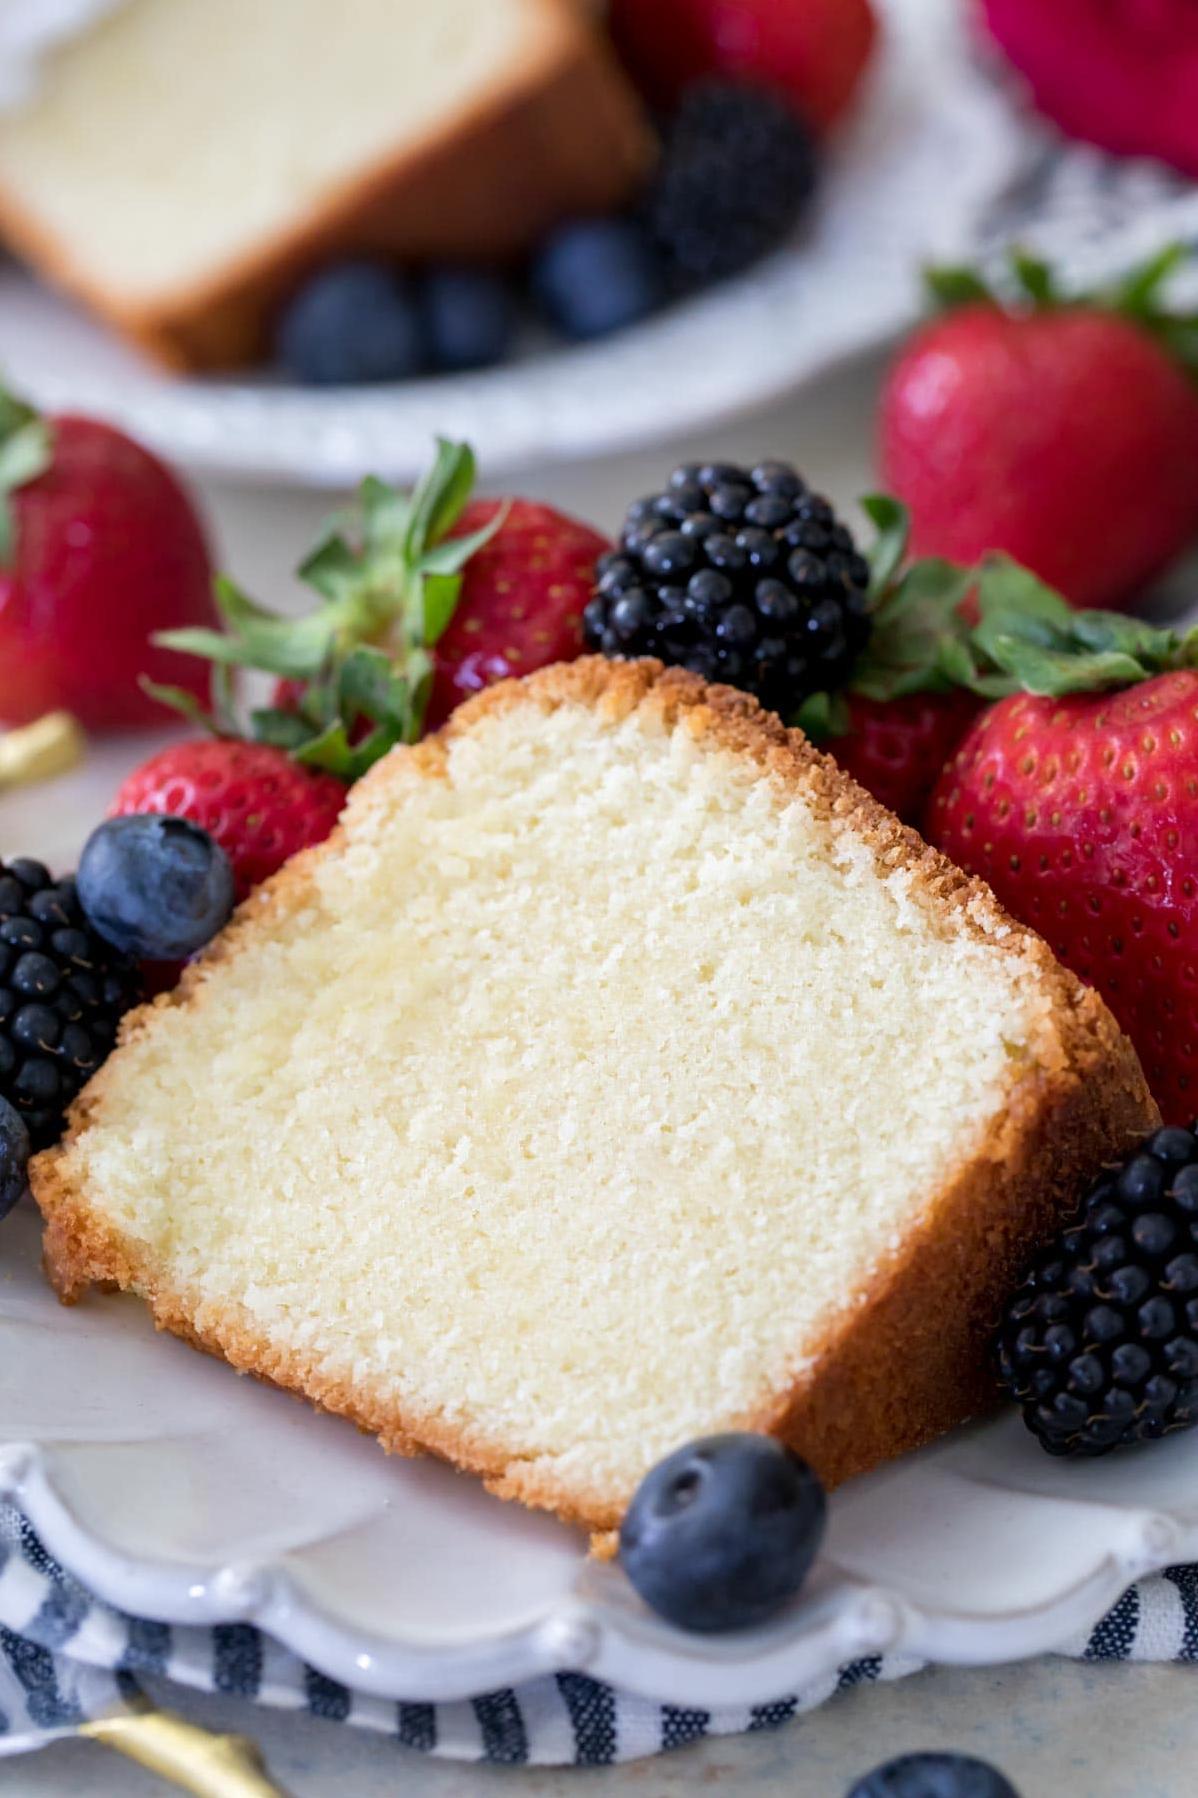  My secret ingredient? Love - this pound cake recipe is sure to steal your heart!